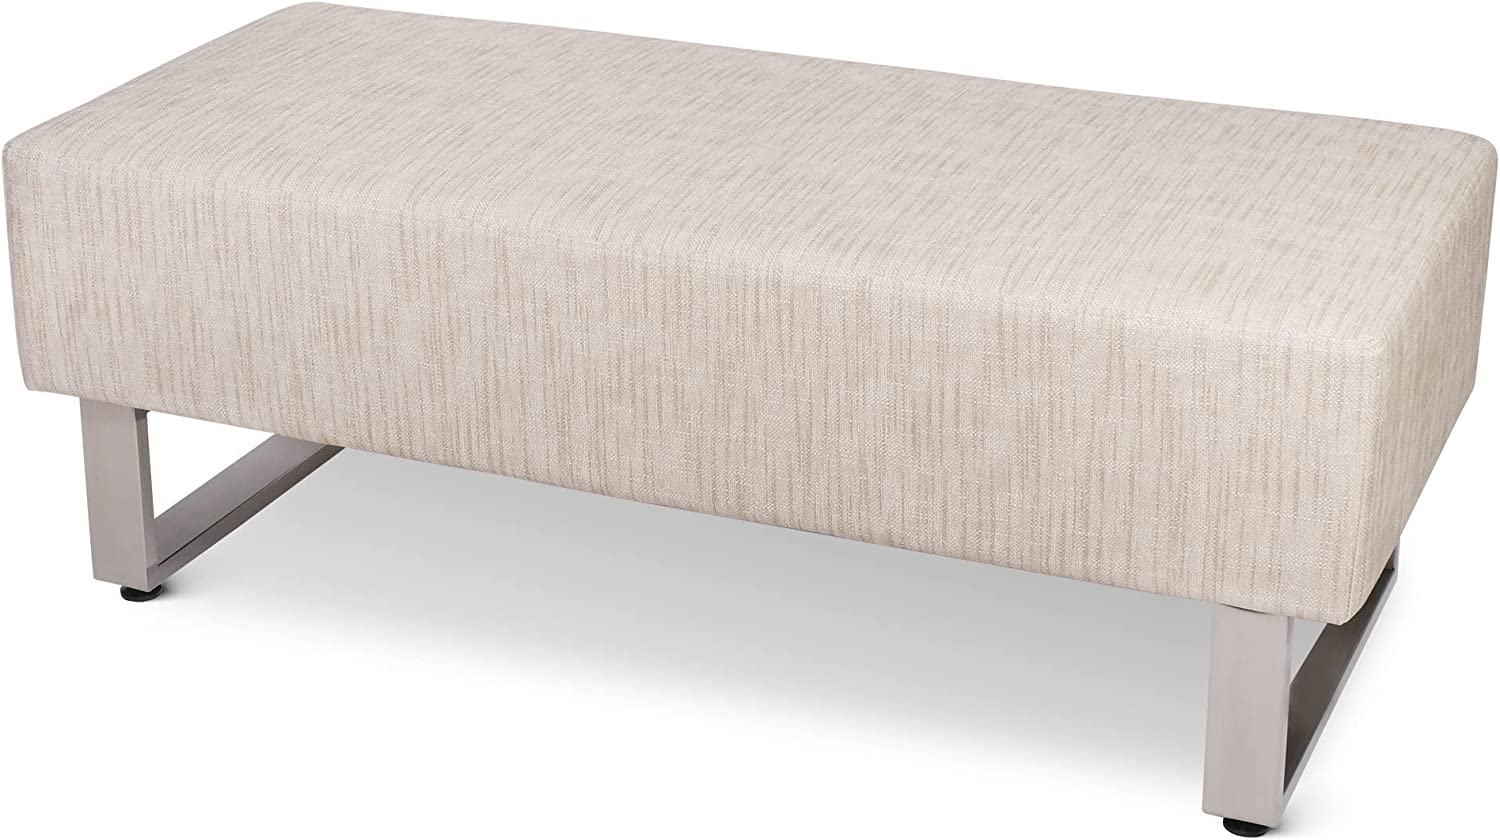 (Out of Stock) Modern PU Leather Dining Room Bench Upholstered Padded Seat, White